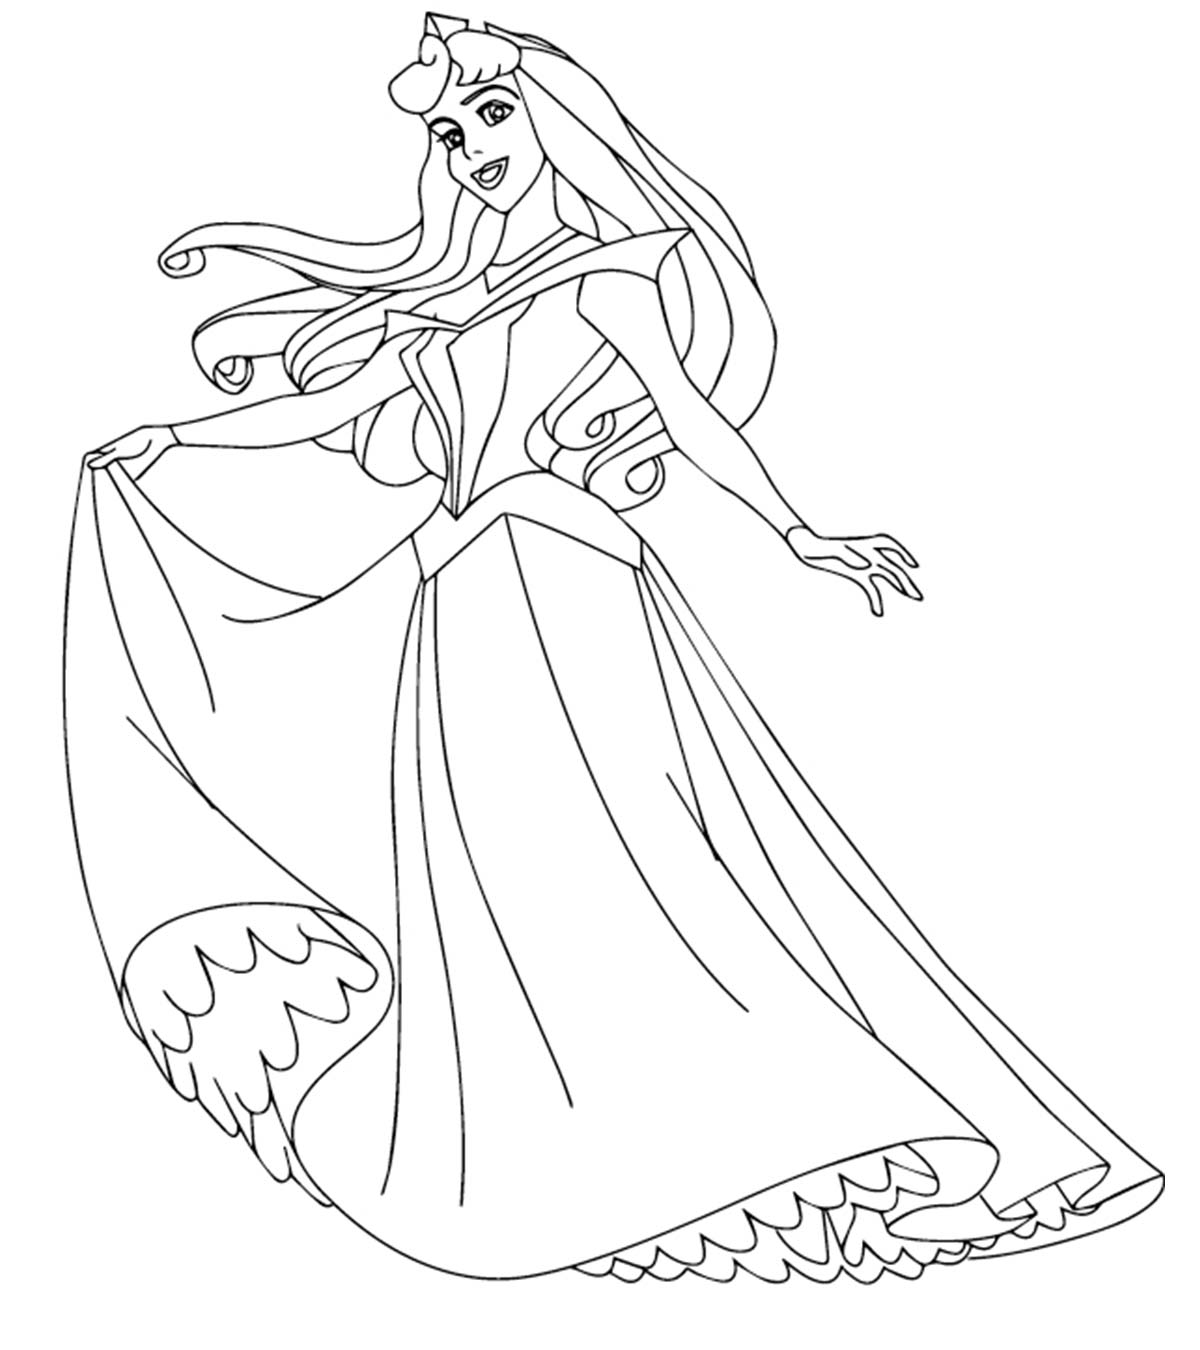 Disney Coloring Pages - MomJunction